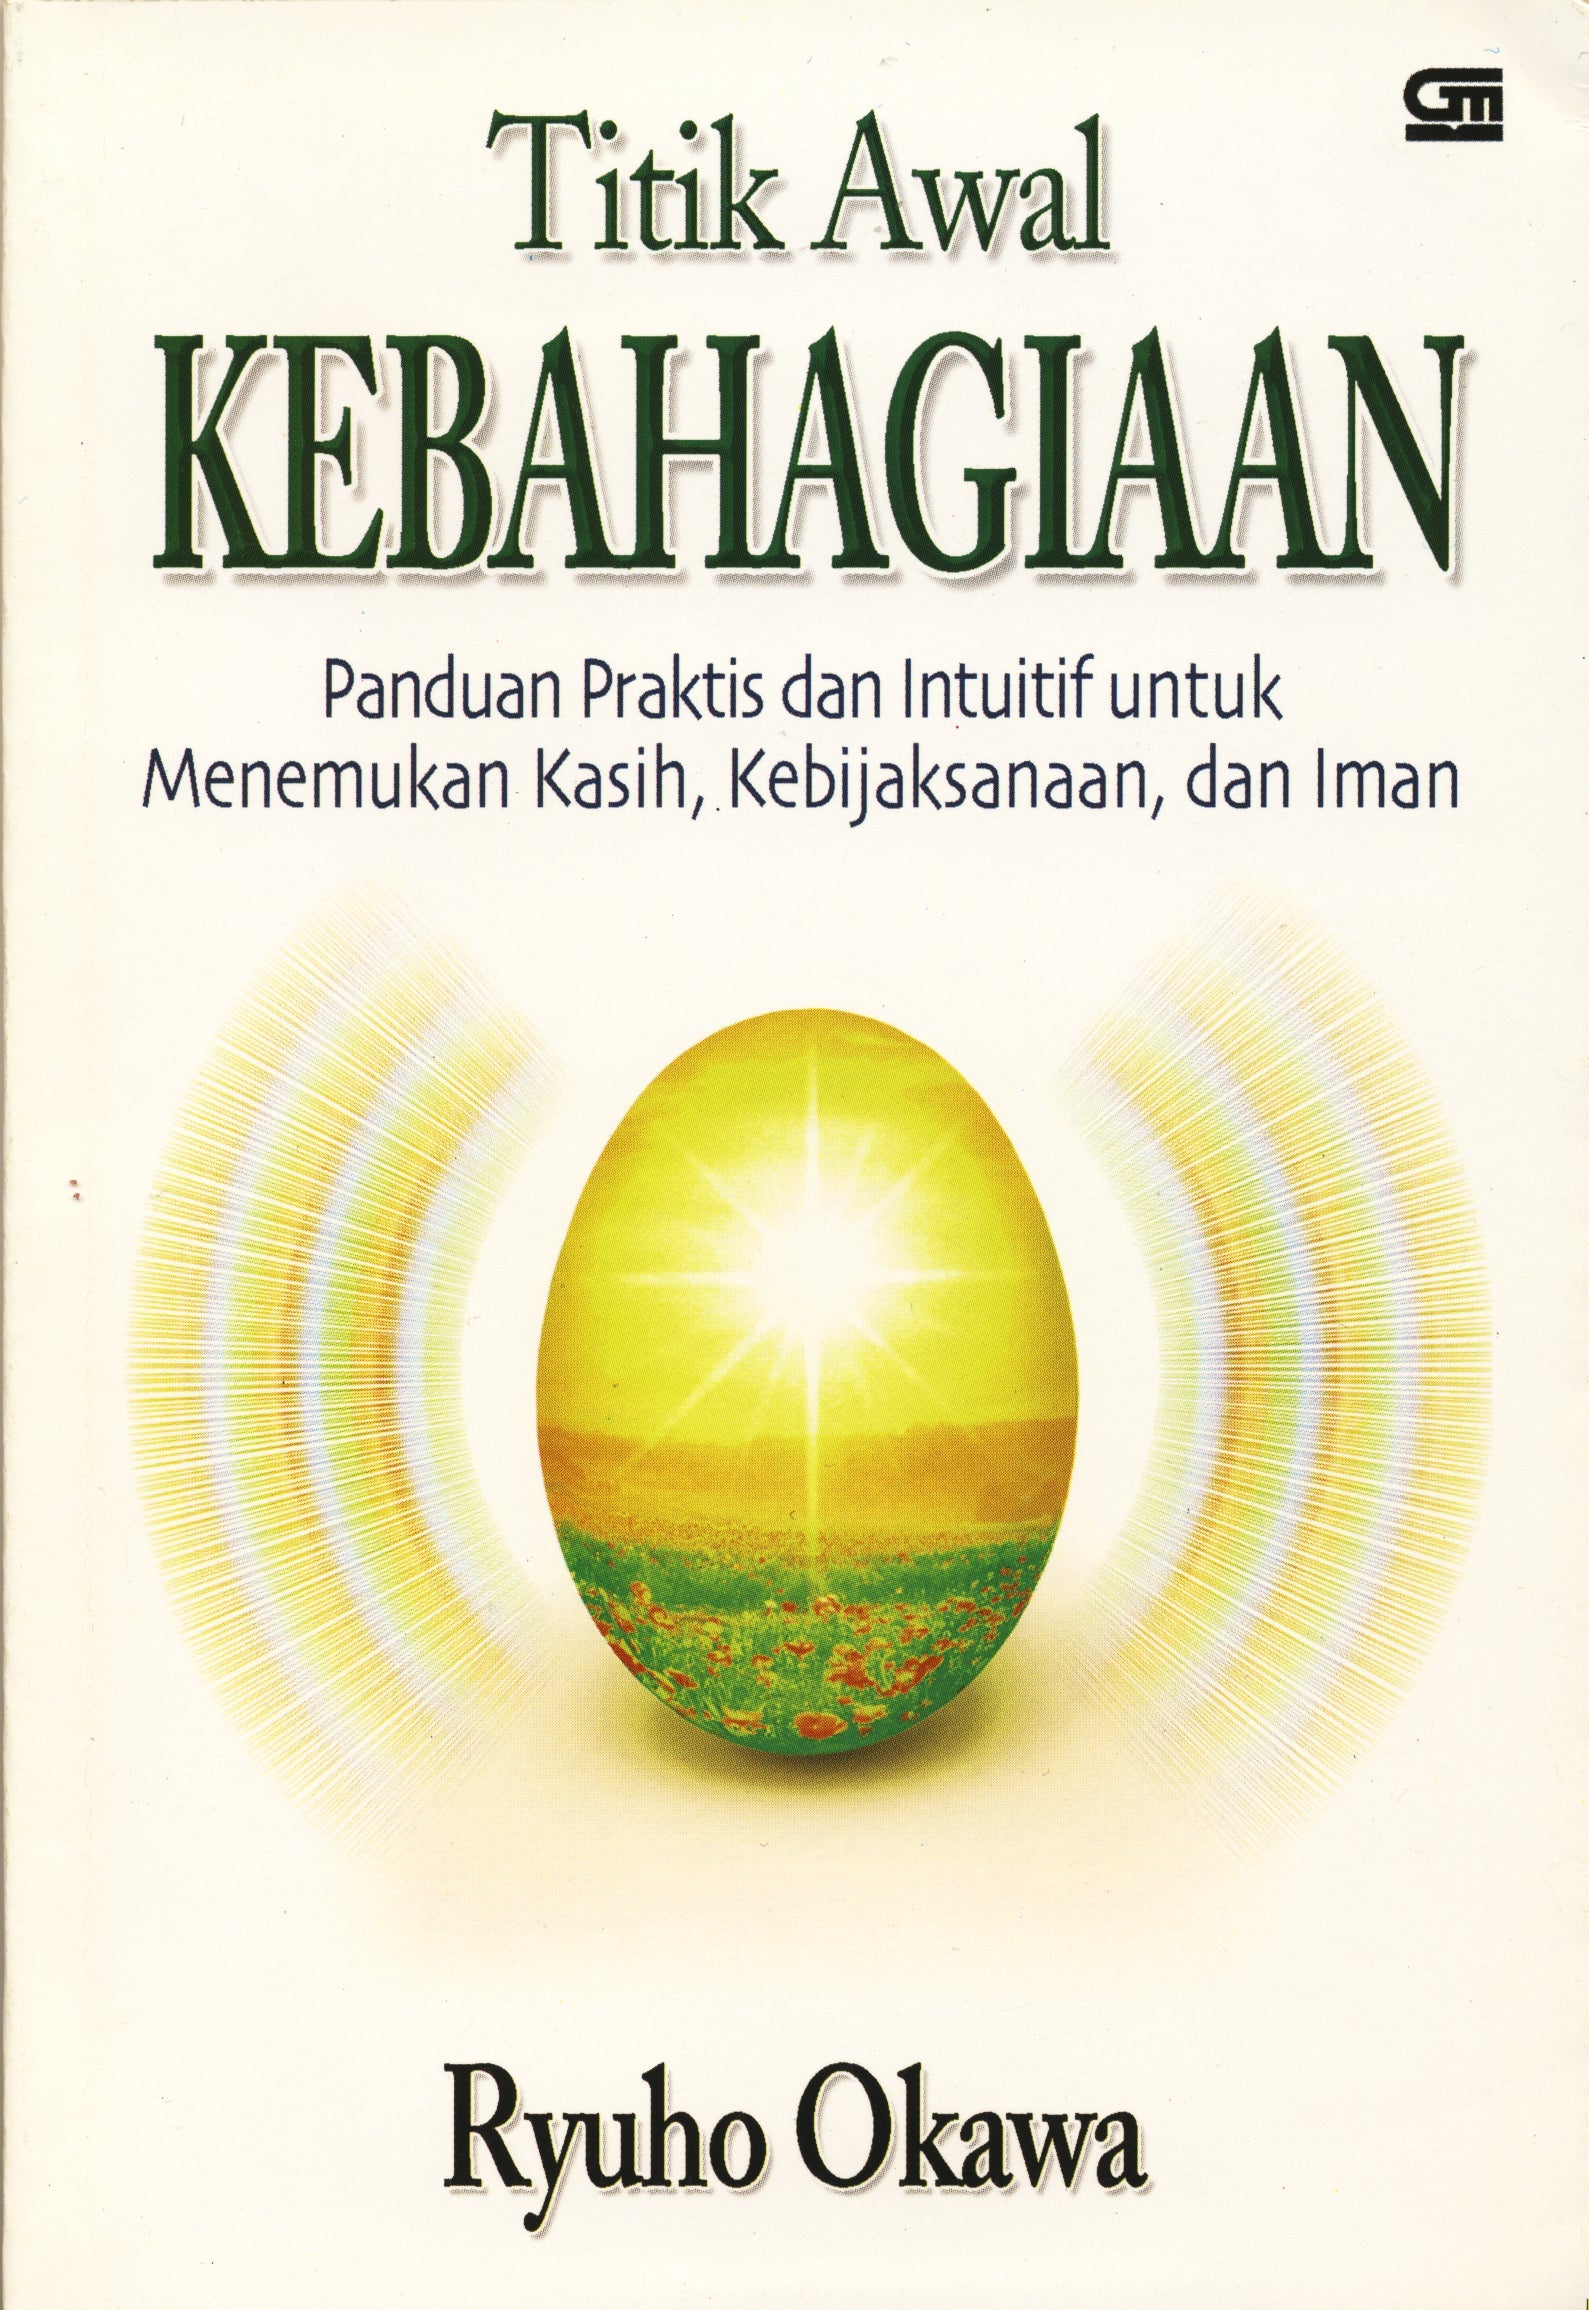 The Starting Point of Happiness : An Inspiring Guide to Positive Living with Faith, Love, and Courage, Ryuho Okawa, Indonesian - IRH Press International